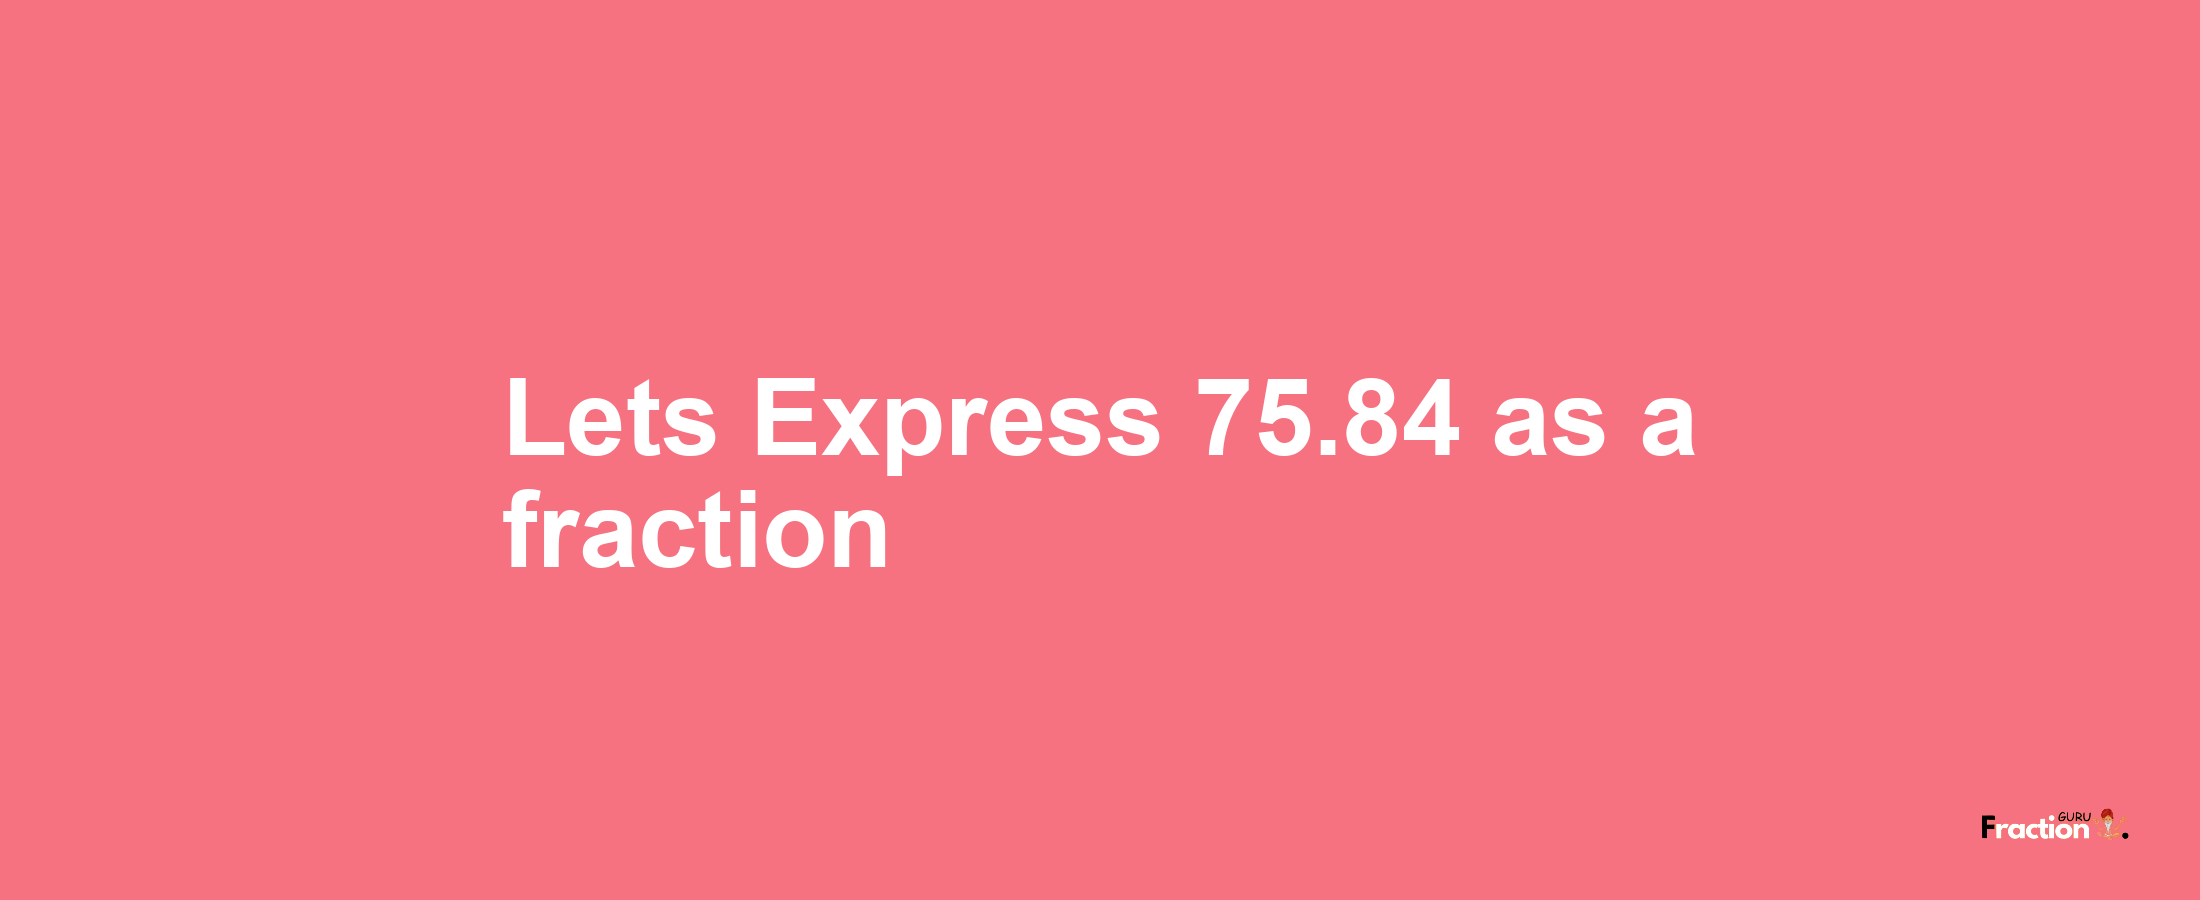 Lets Express 75.84 as afraction